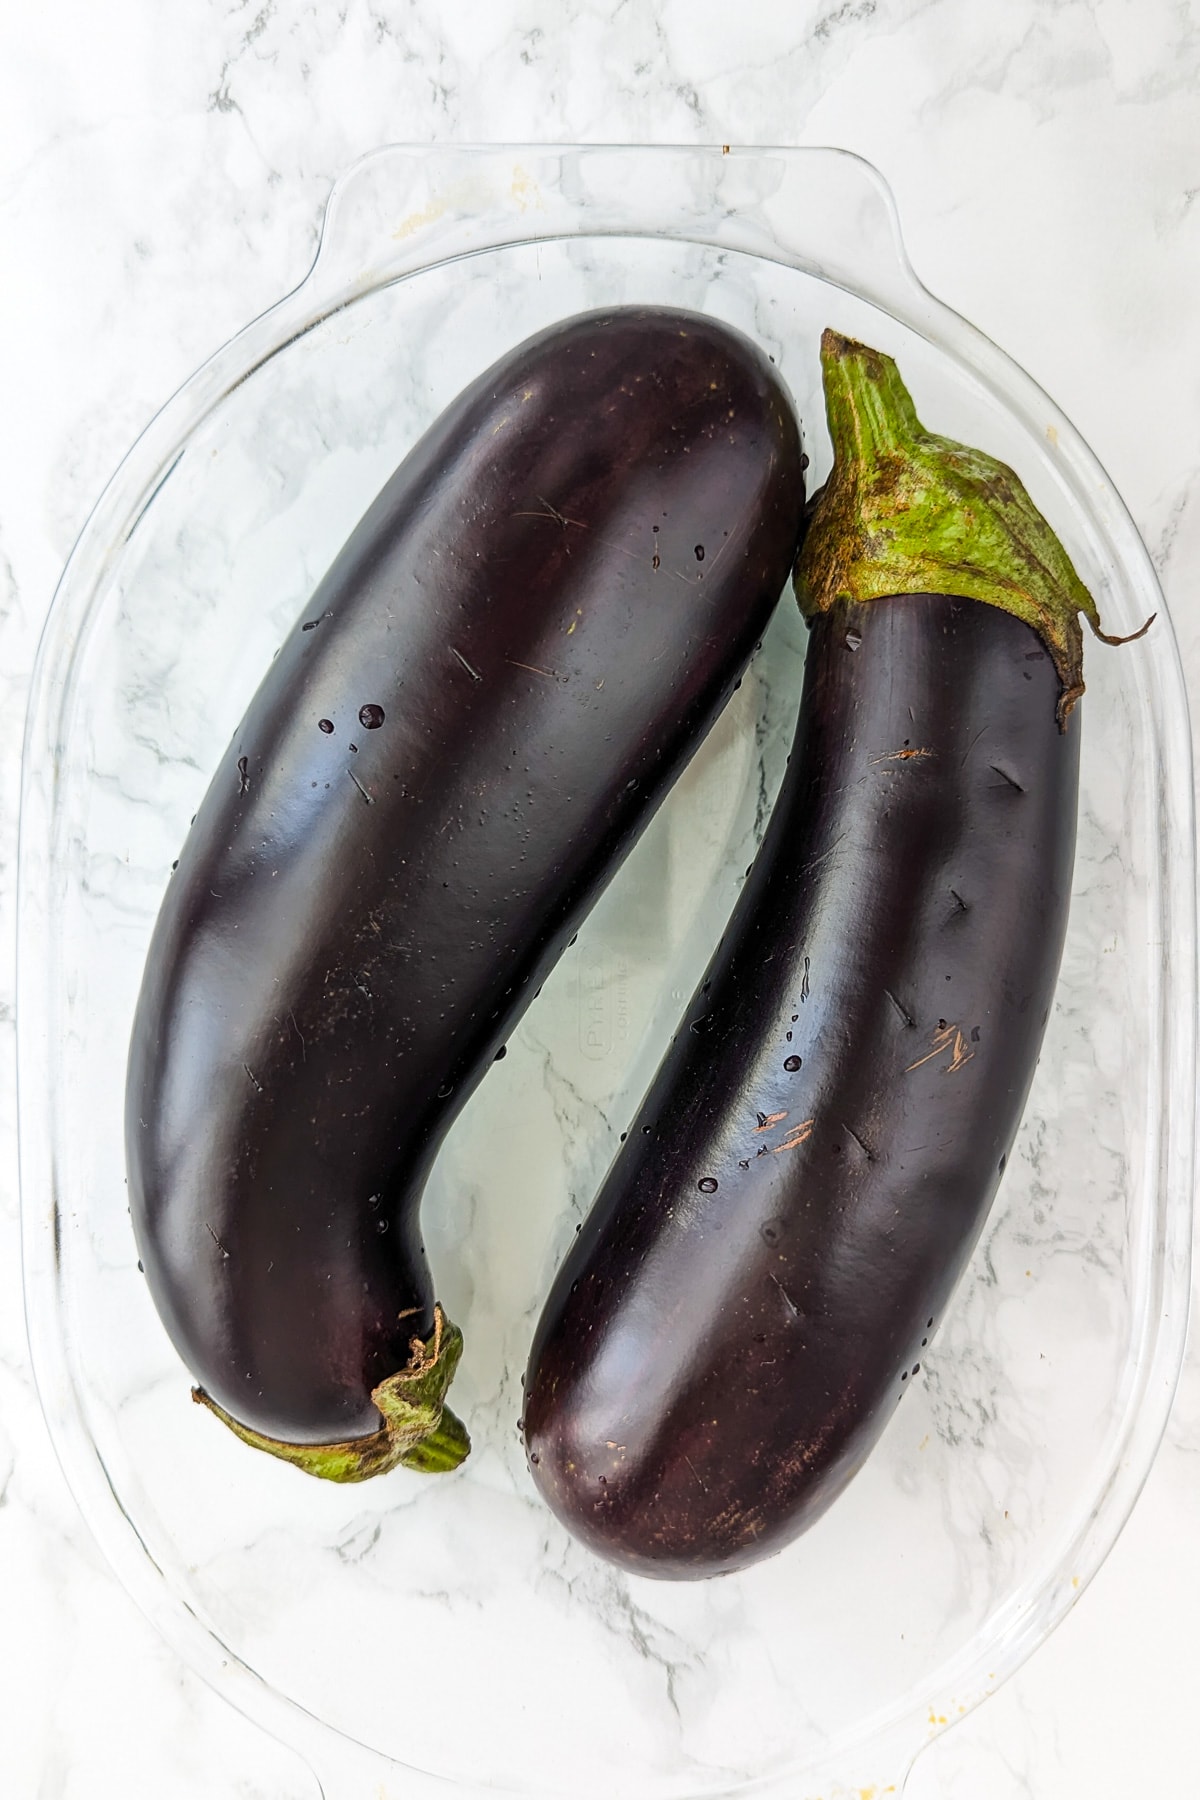 Top view of 2 raw eggplants sitting in a transparent baking dish.